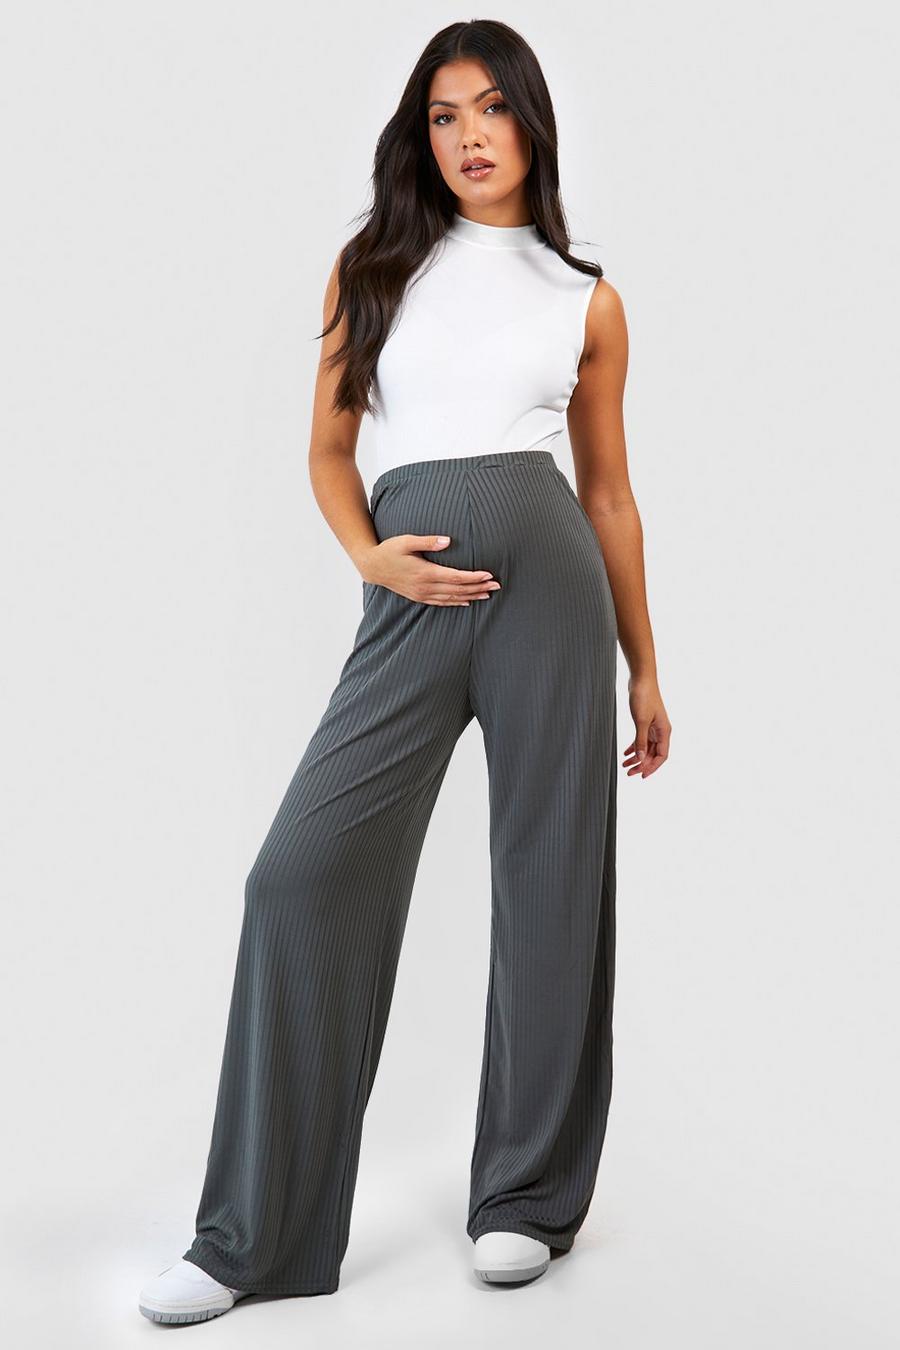 Maternity Clothes | Maternity Outfits & Pregnancy Clothing | boohoo UK